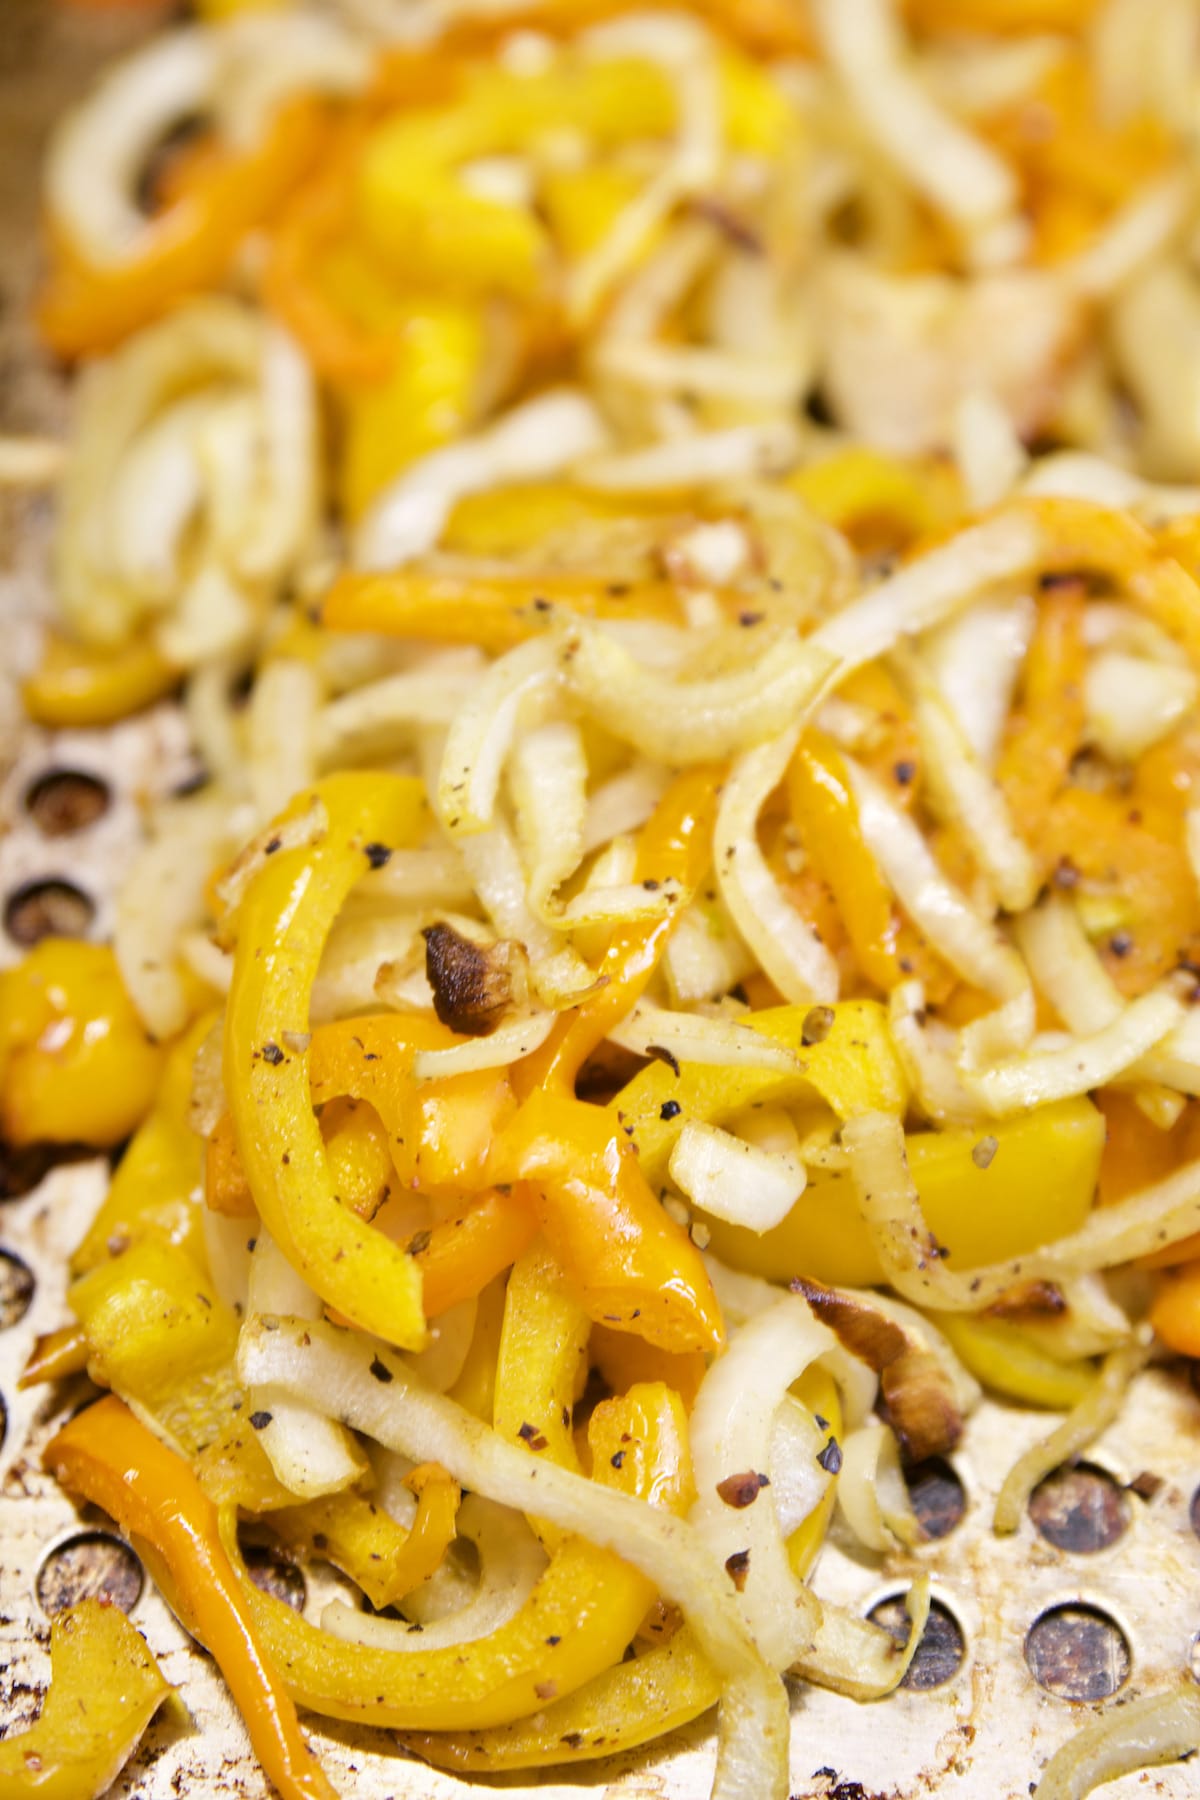 Grilled onions, peppers for sliders.